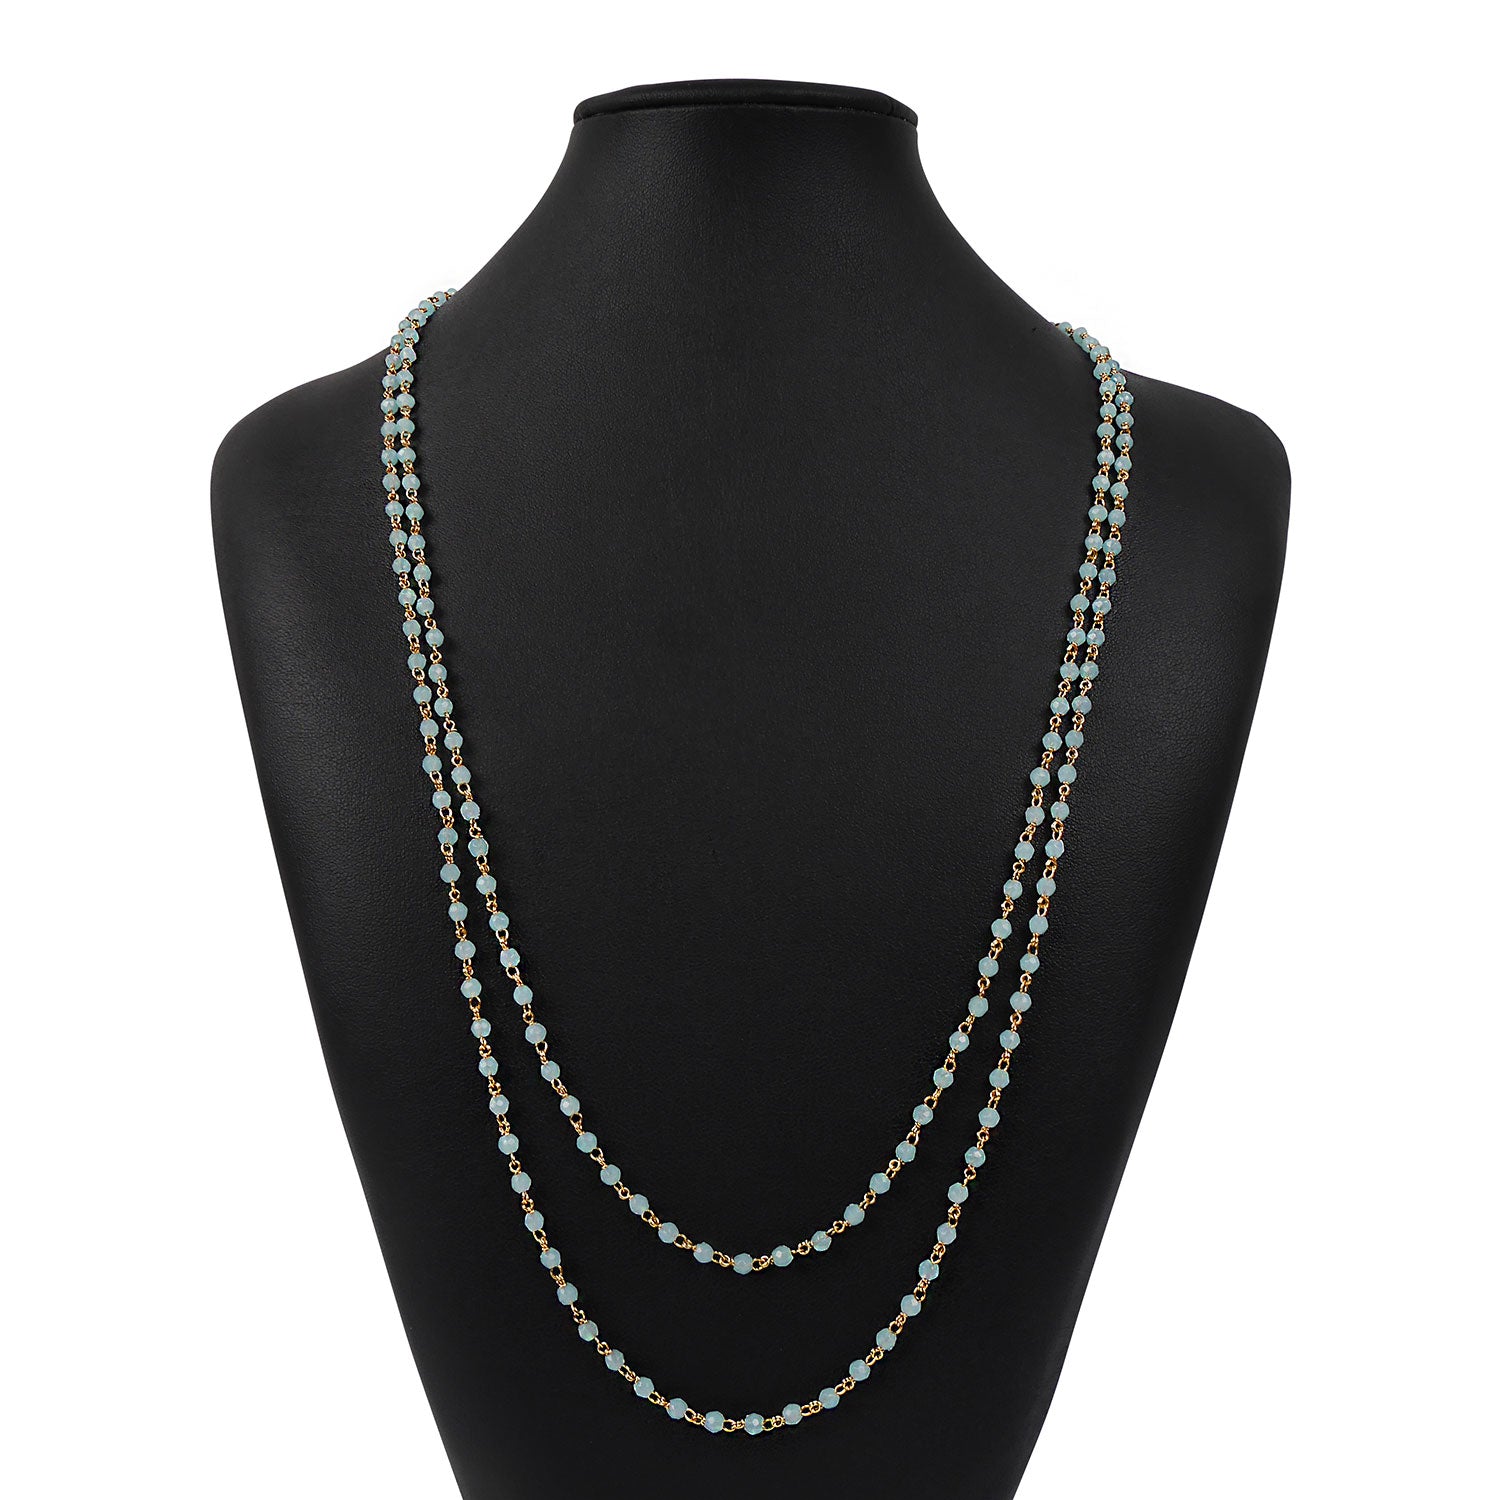 Maria Layered Bead Necklace in Light Blue